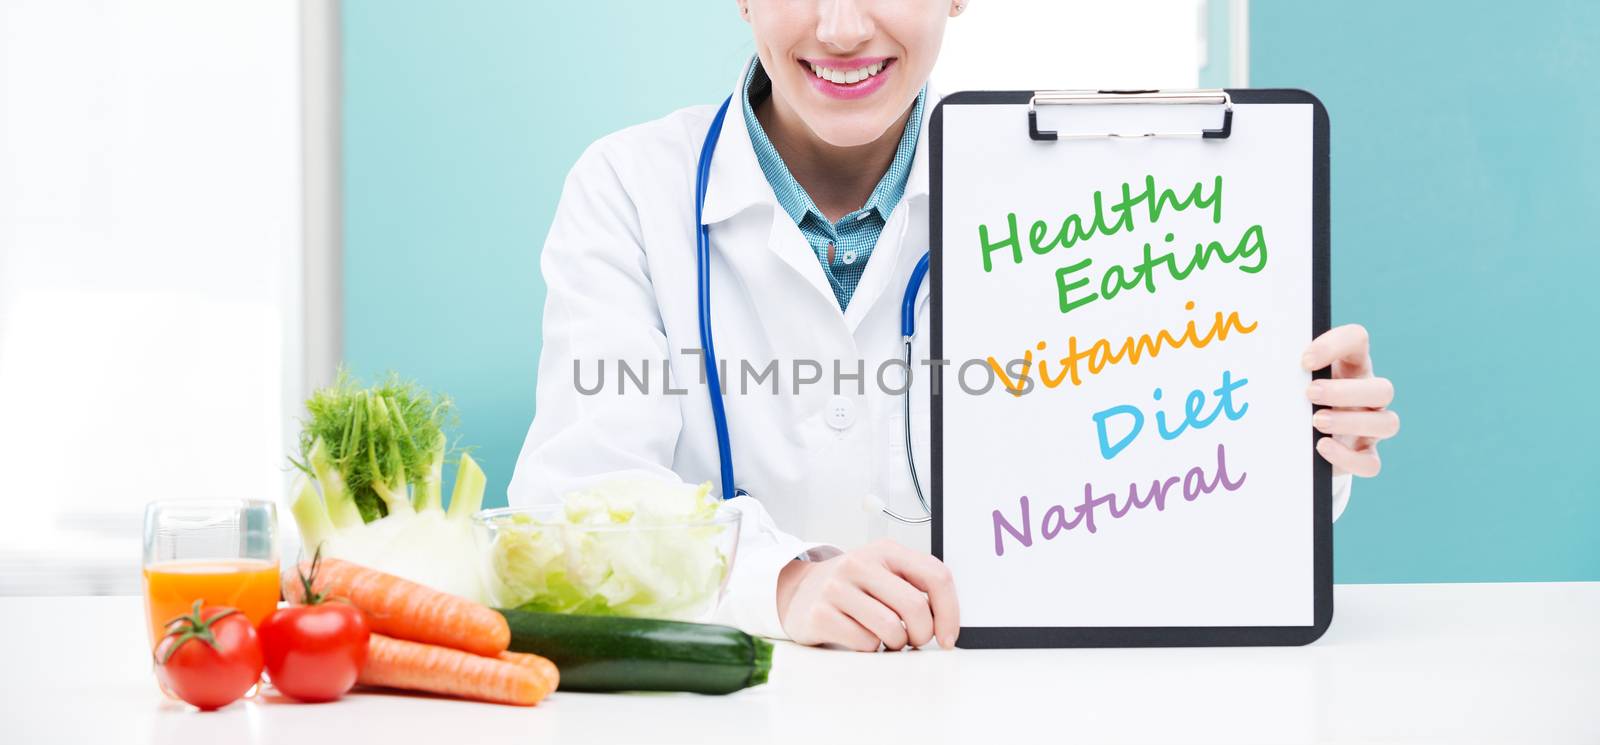 A portrait of cheerful healthcare professional promoting healthy eating